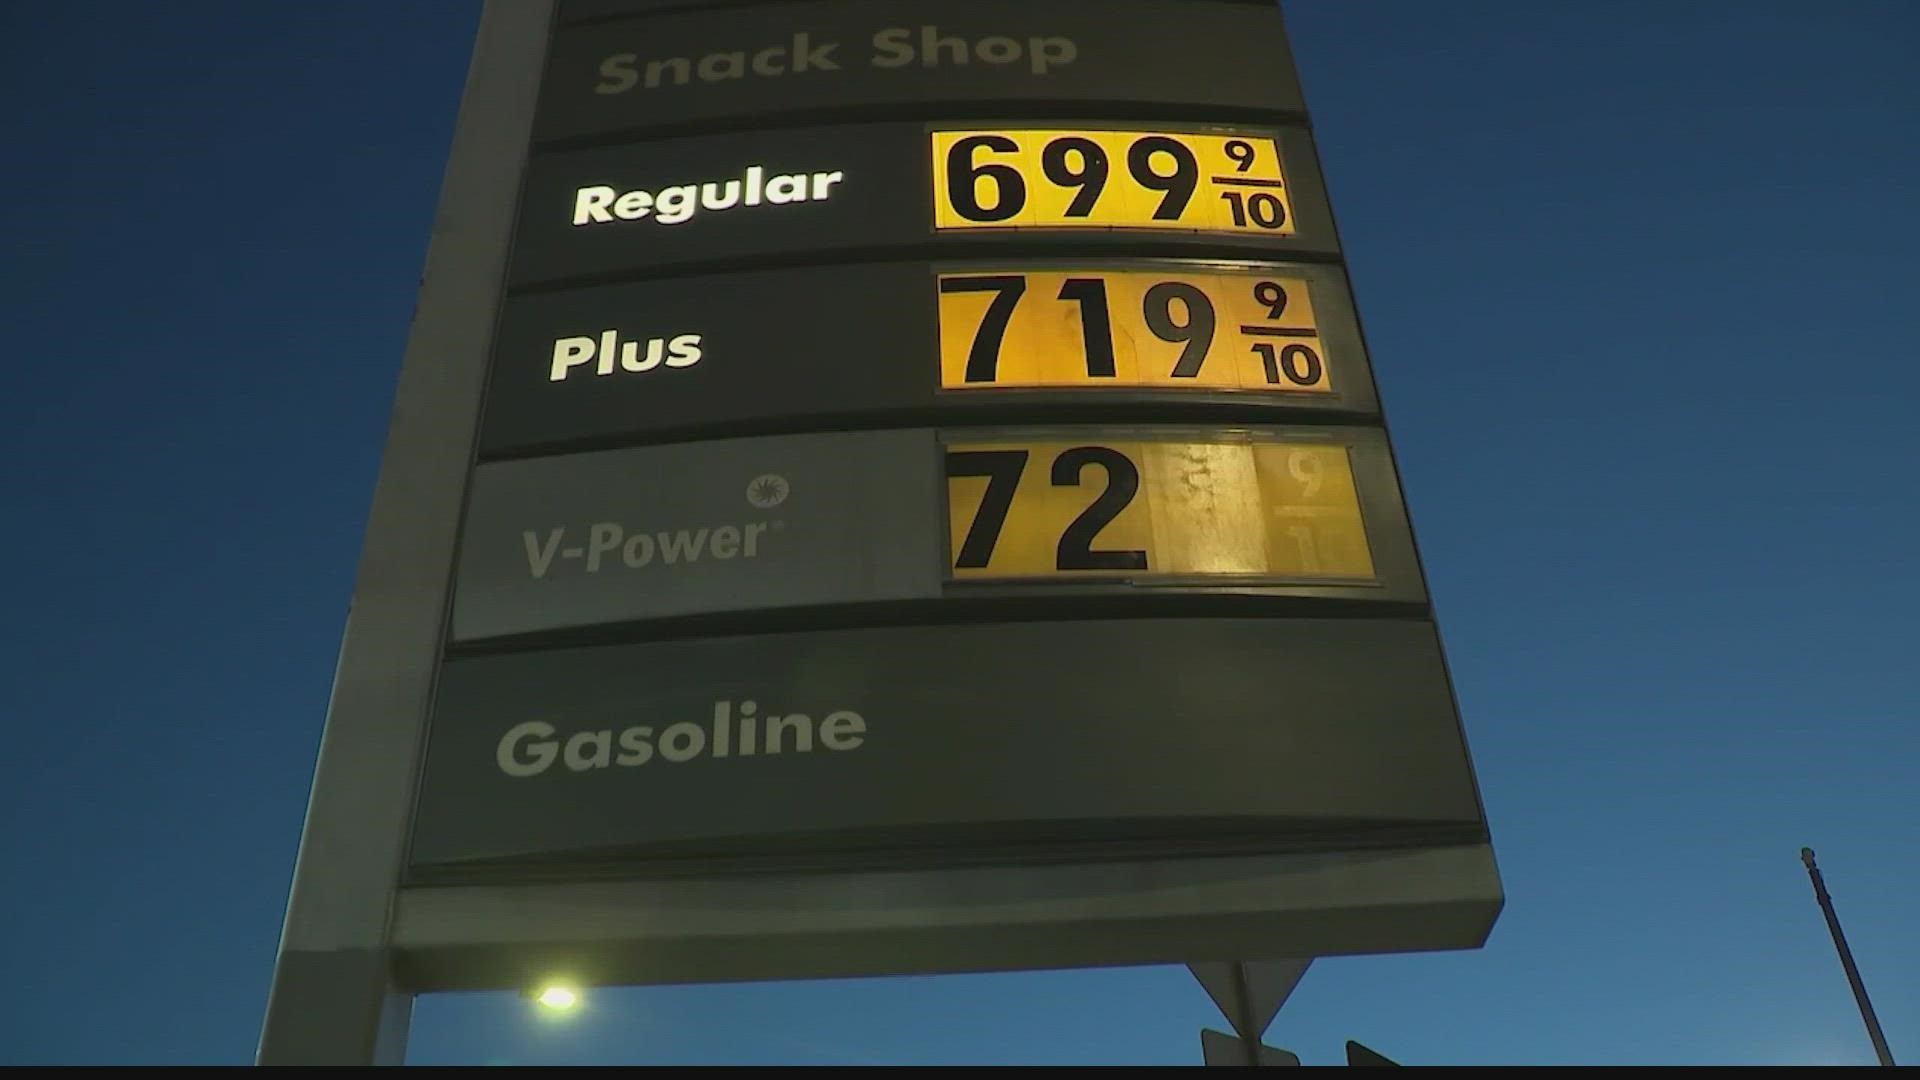 According to GasBuddy, Huntsville's gas prices fall below the national average.